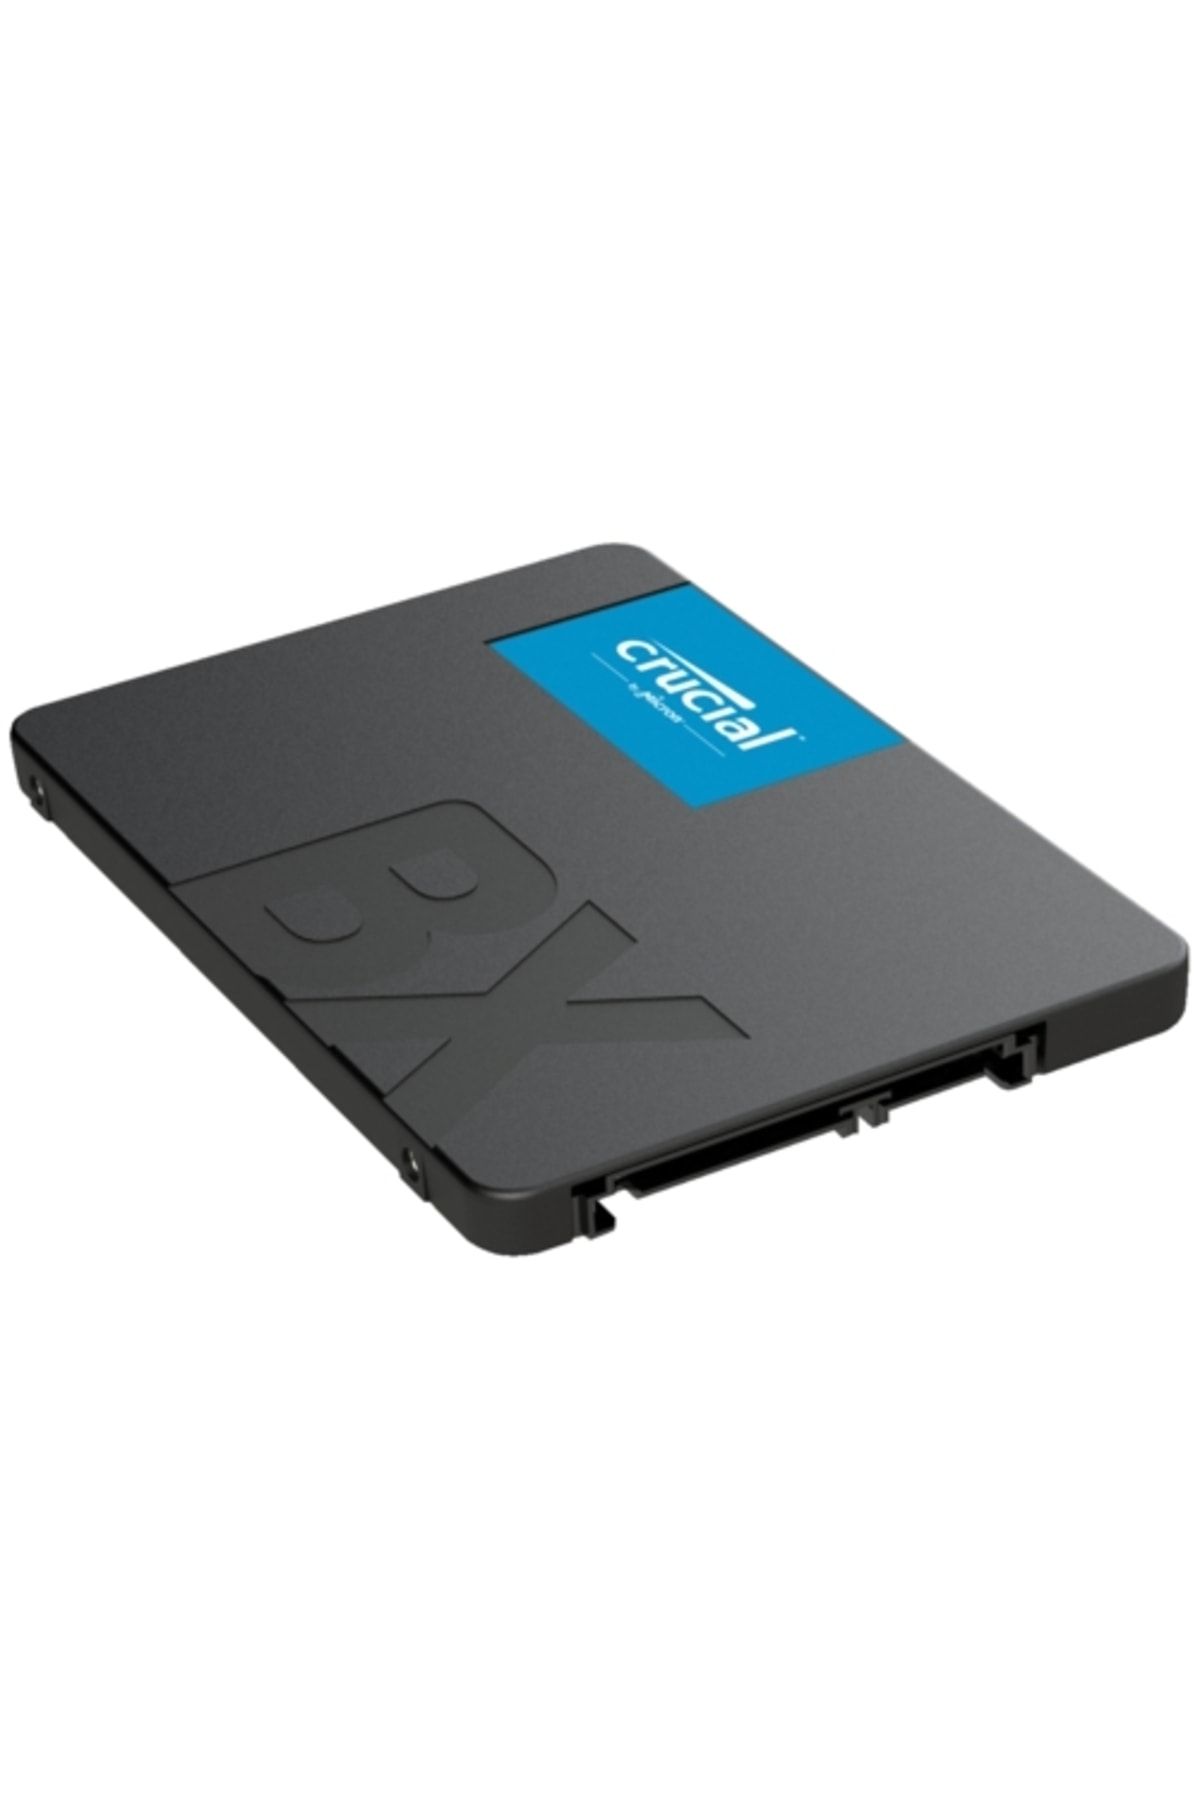 Crucial Bx500 240gb 3dnand Ssd Disk Ct240bx500ssd1